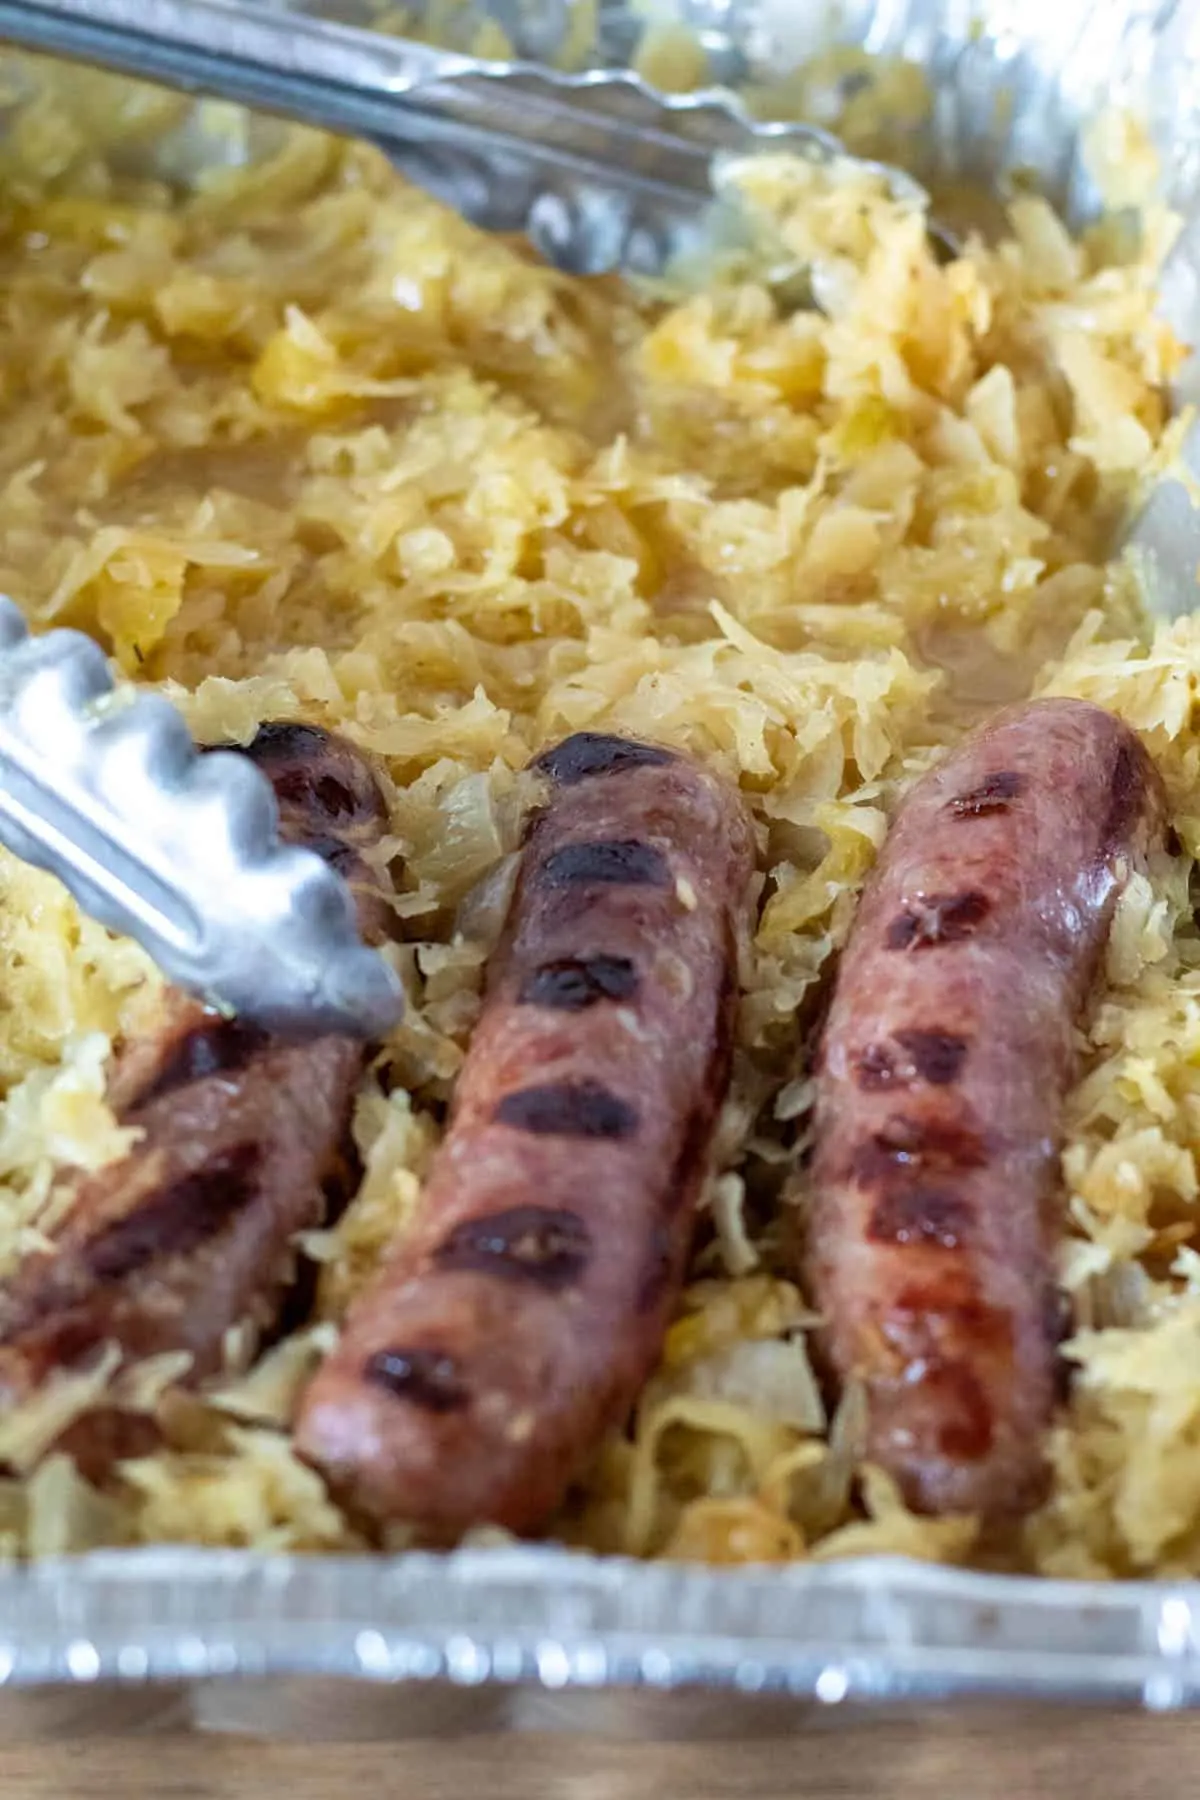 Grilled brats with tongs in disposable pan of sauerkraut.